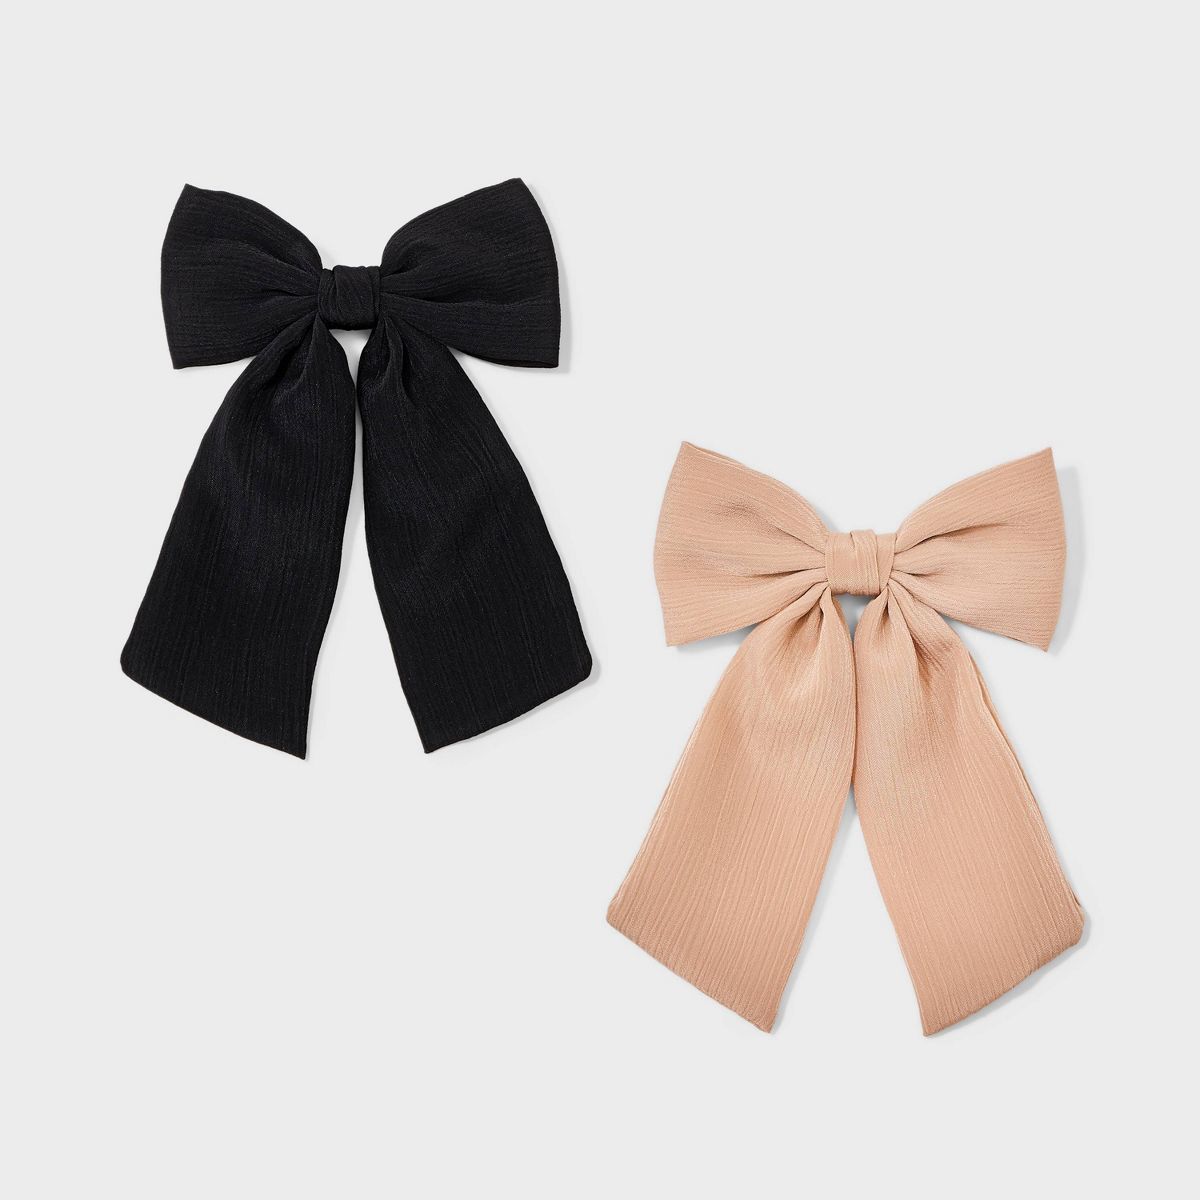 Hair Bow Barrette 2pc - A New Day™ Black/Tan | Target